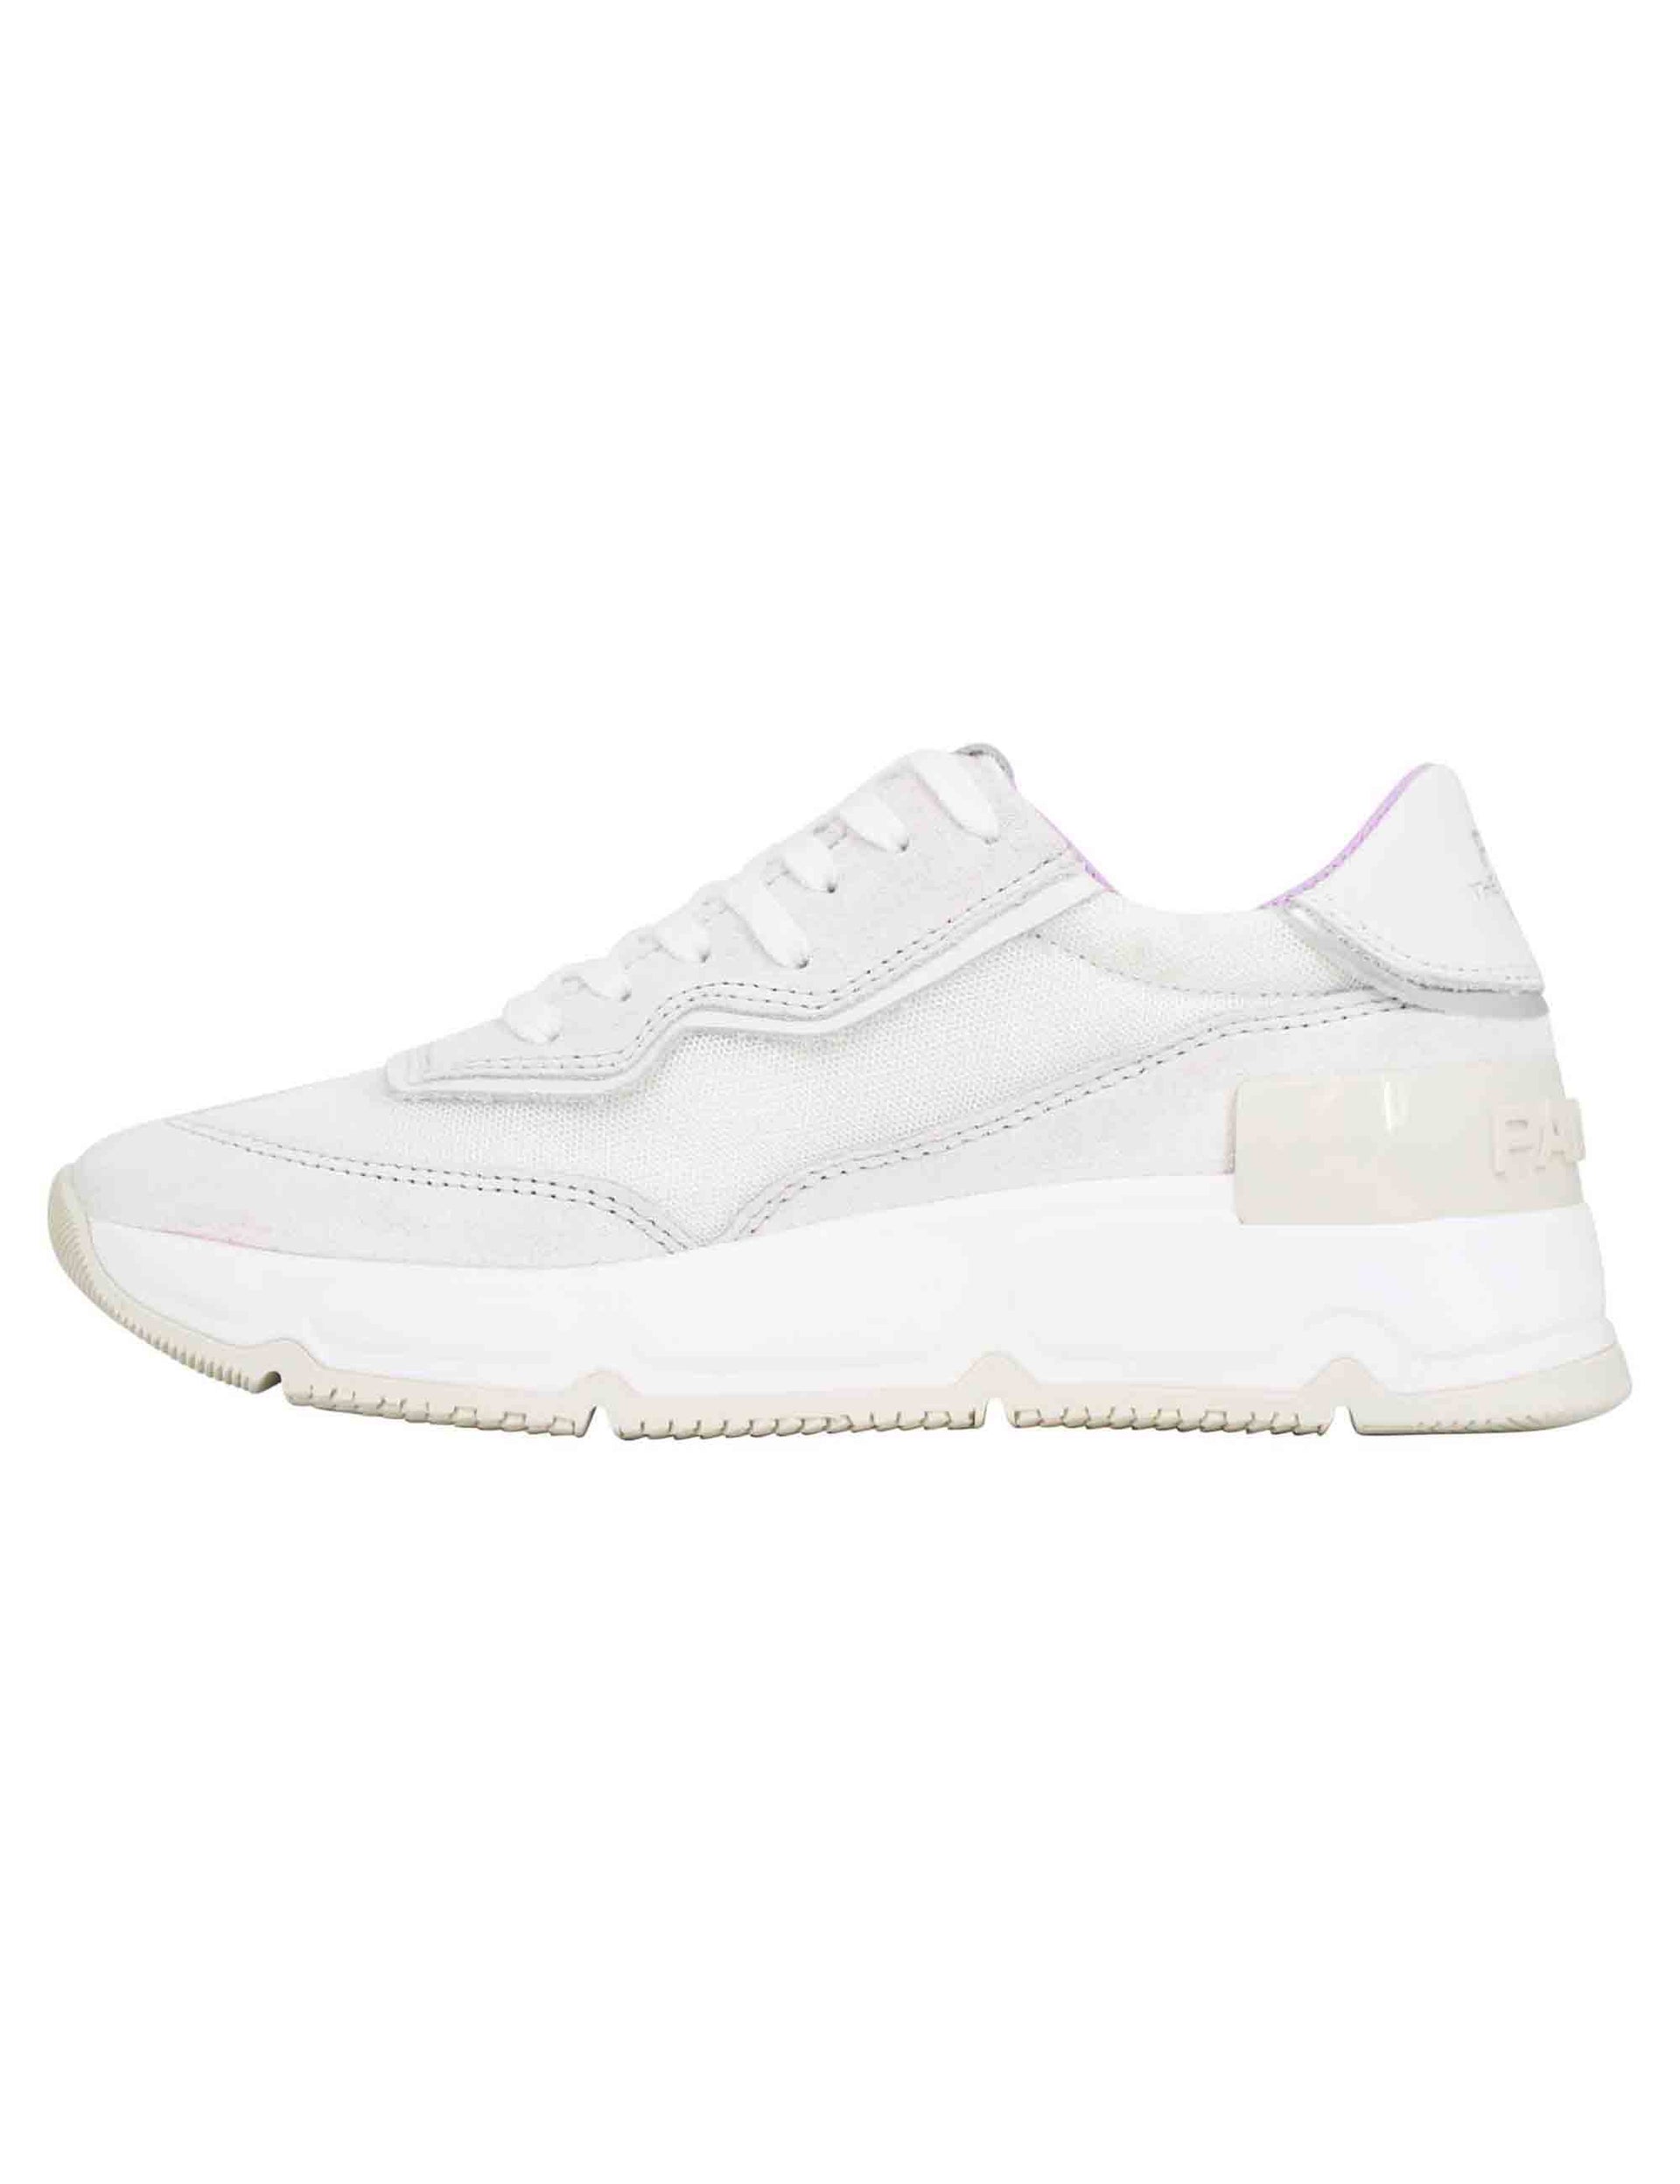 Women's sneakers in white leather and fabric